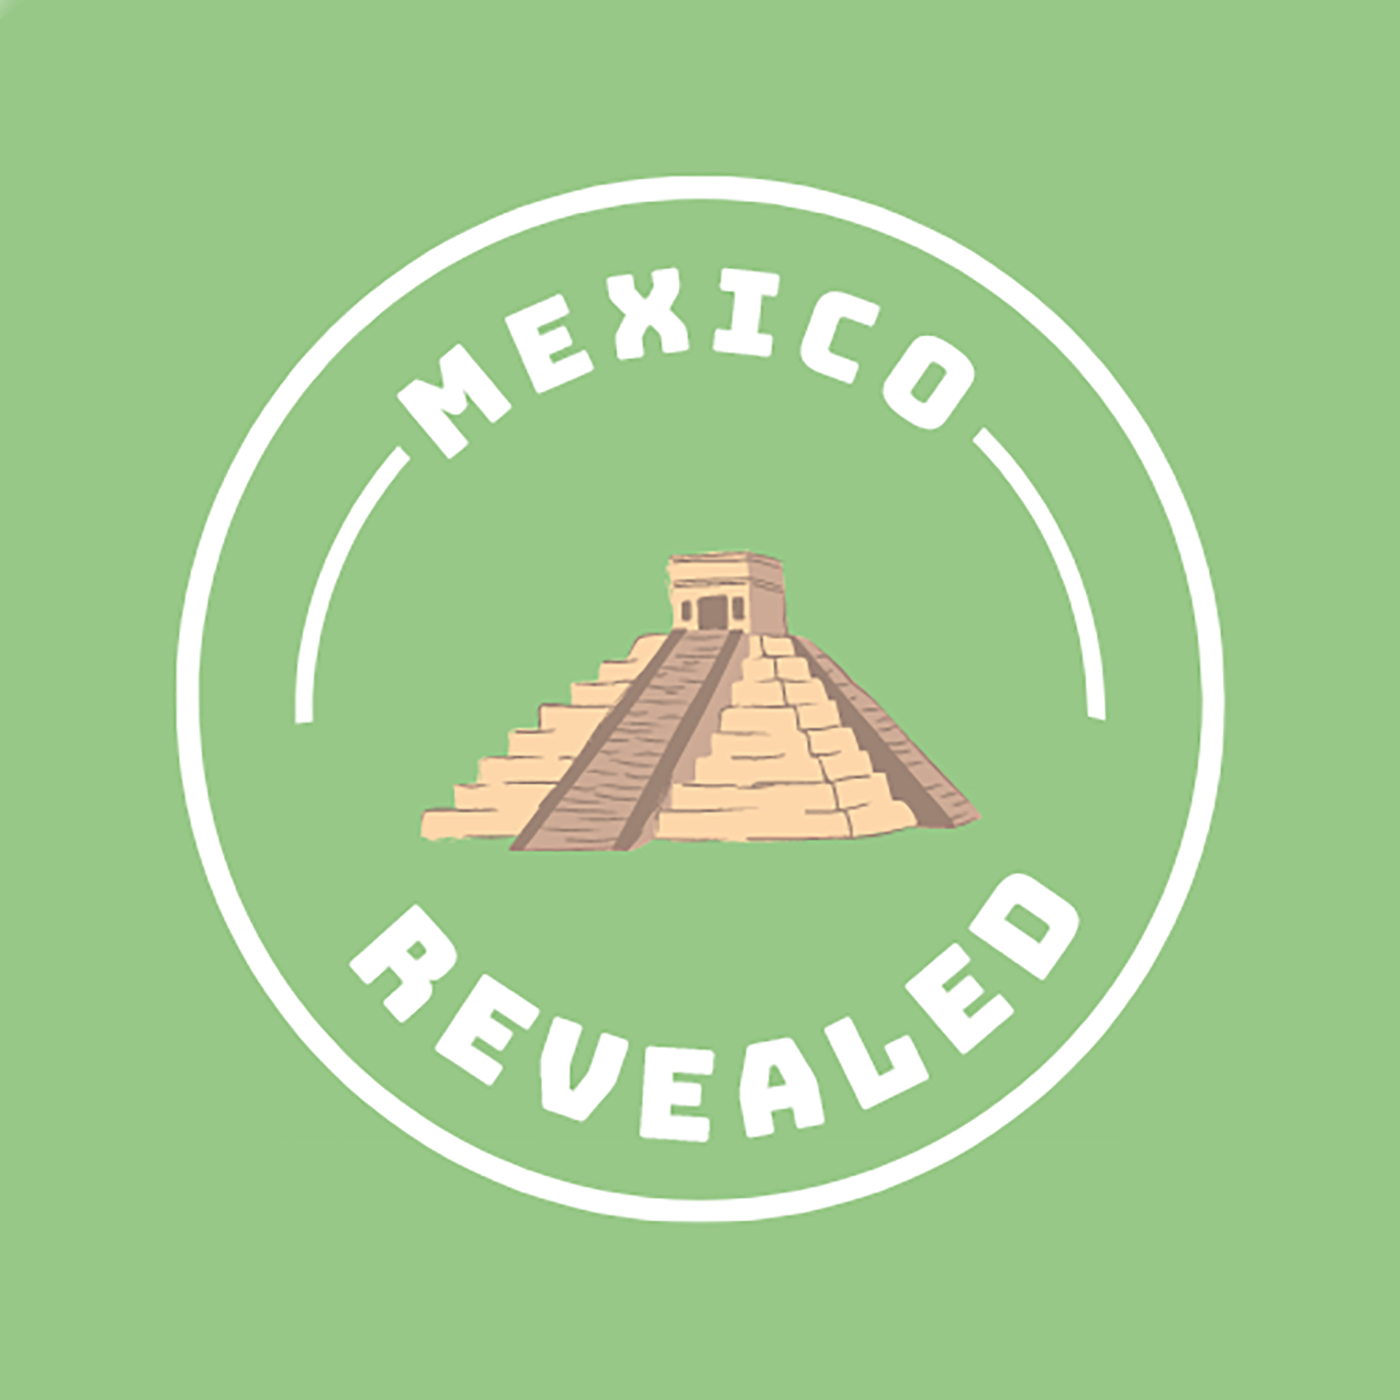 Ep. 8: Our picks for the Top 5 museums to visit in Mexico City